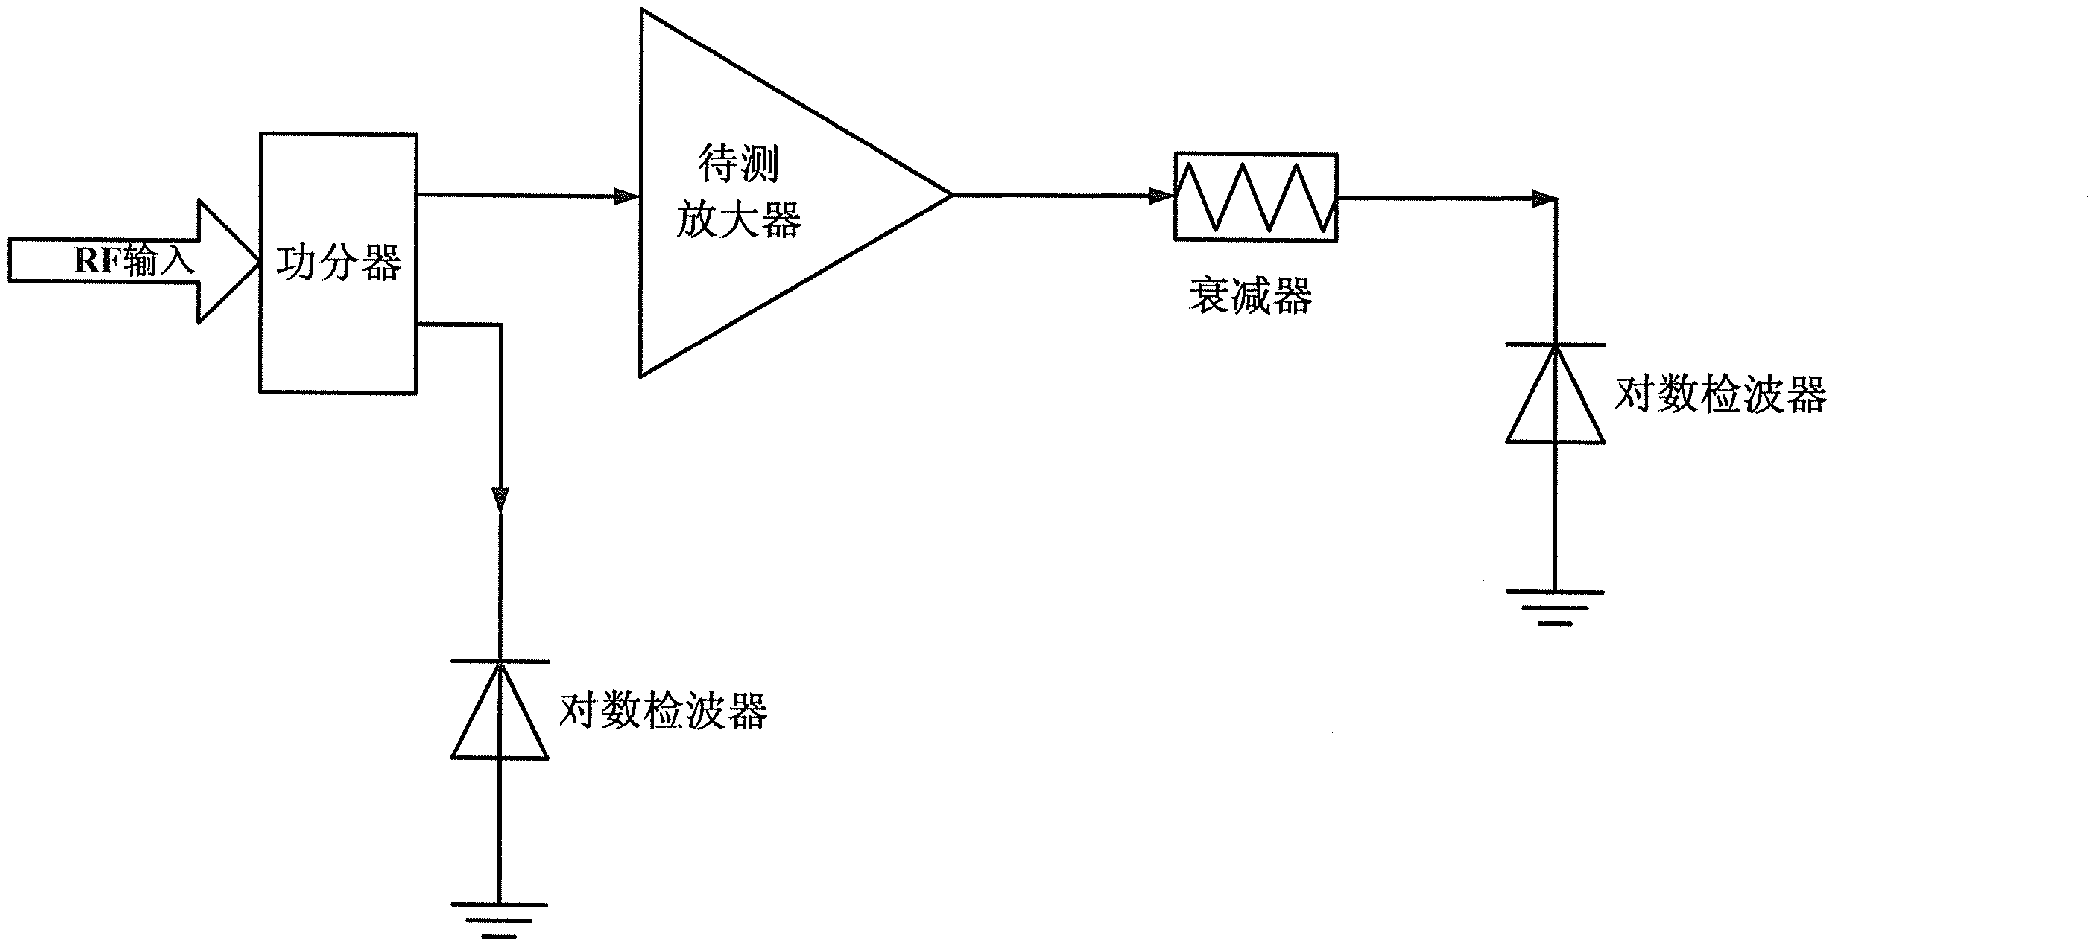 Device and method used for testing radio frequency amplifier gain